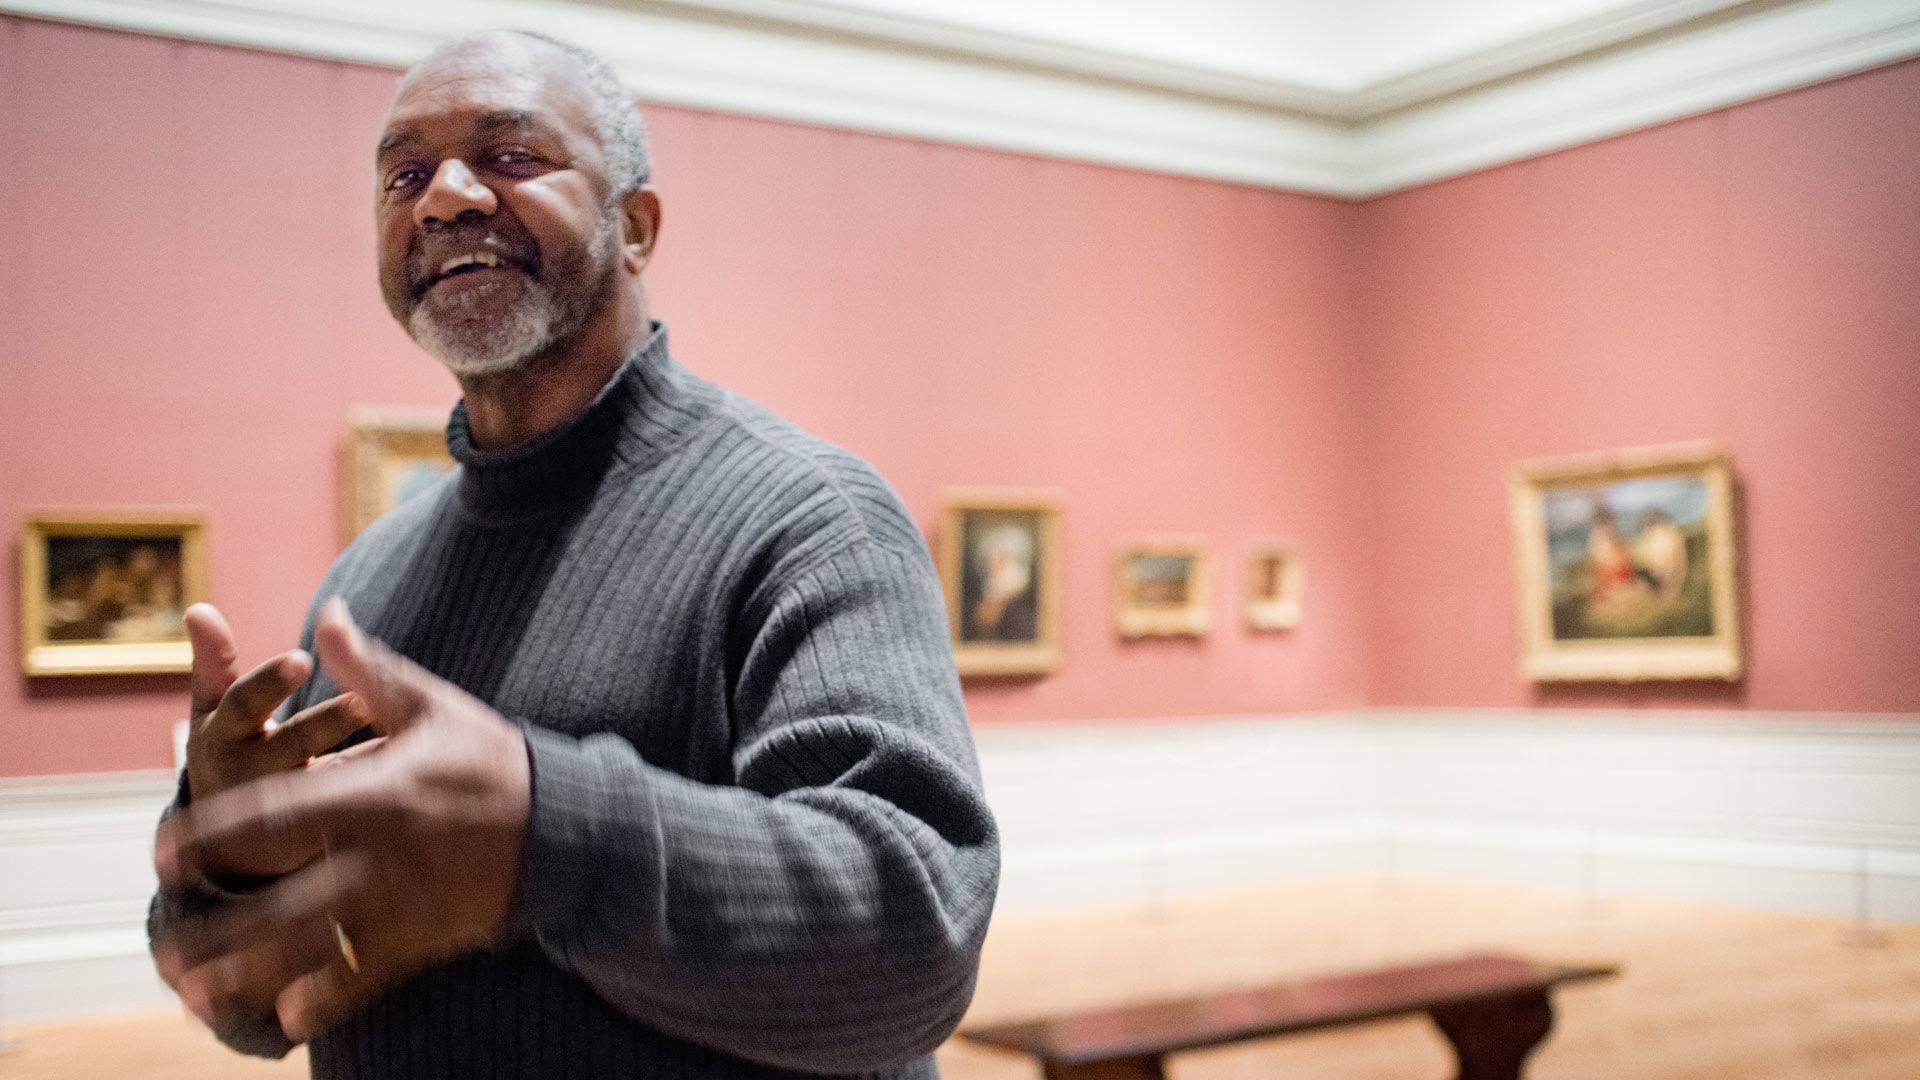 Kerry James Marshall on Jean Auguste Dominique Ingres's 